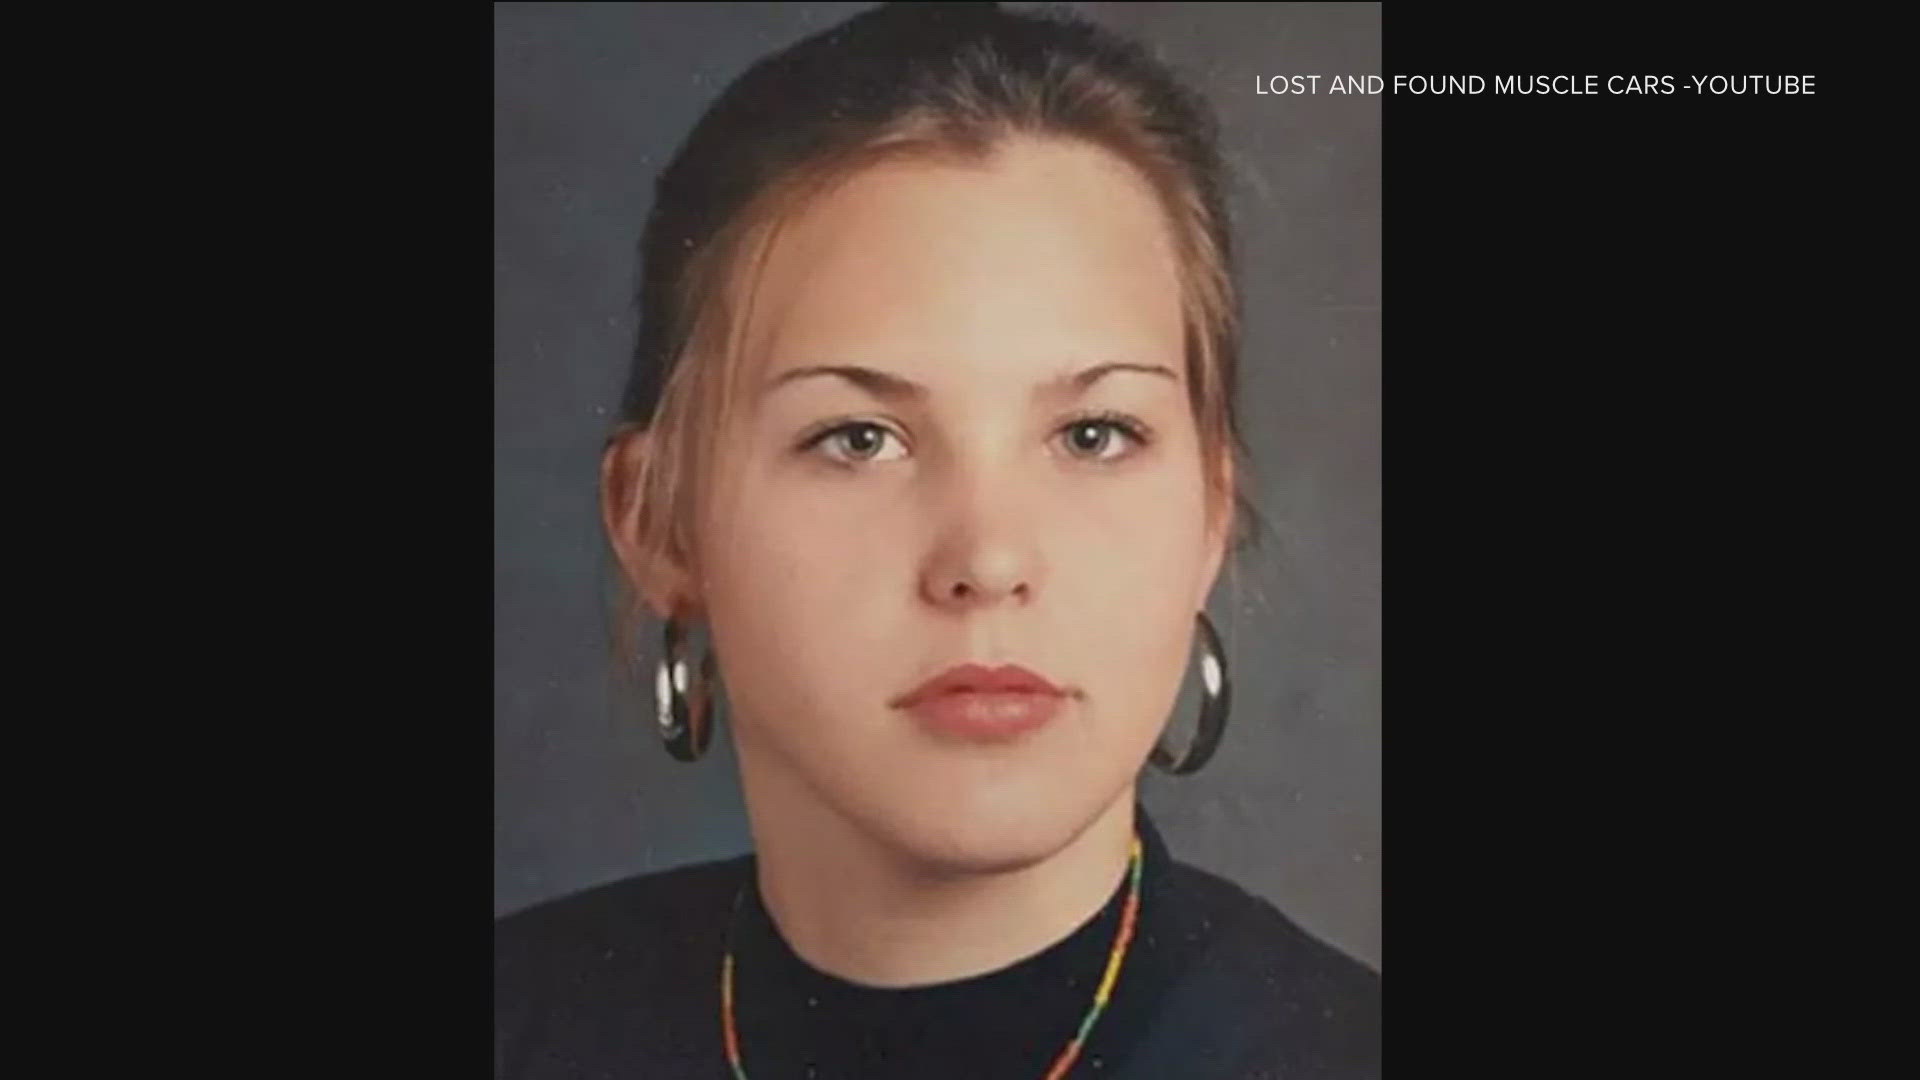 On Oct. 14, 1994, 17-year-old Krystyn Dunlap-Bosse disappeared after telling people she need to "get away."